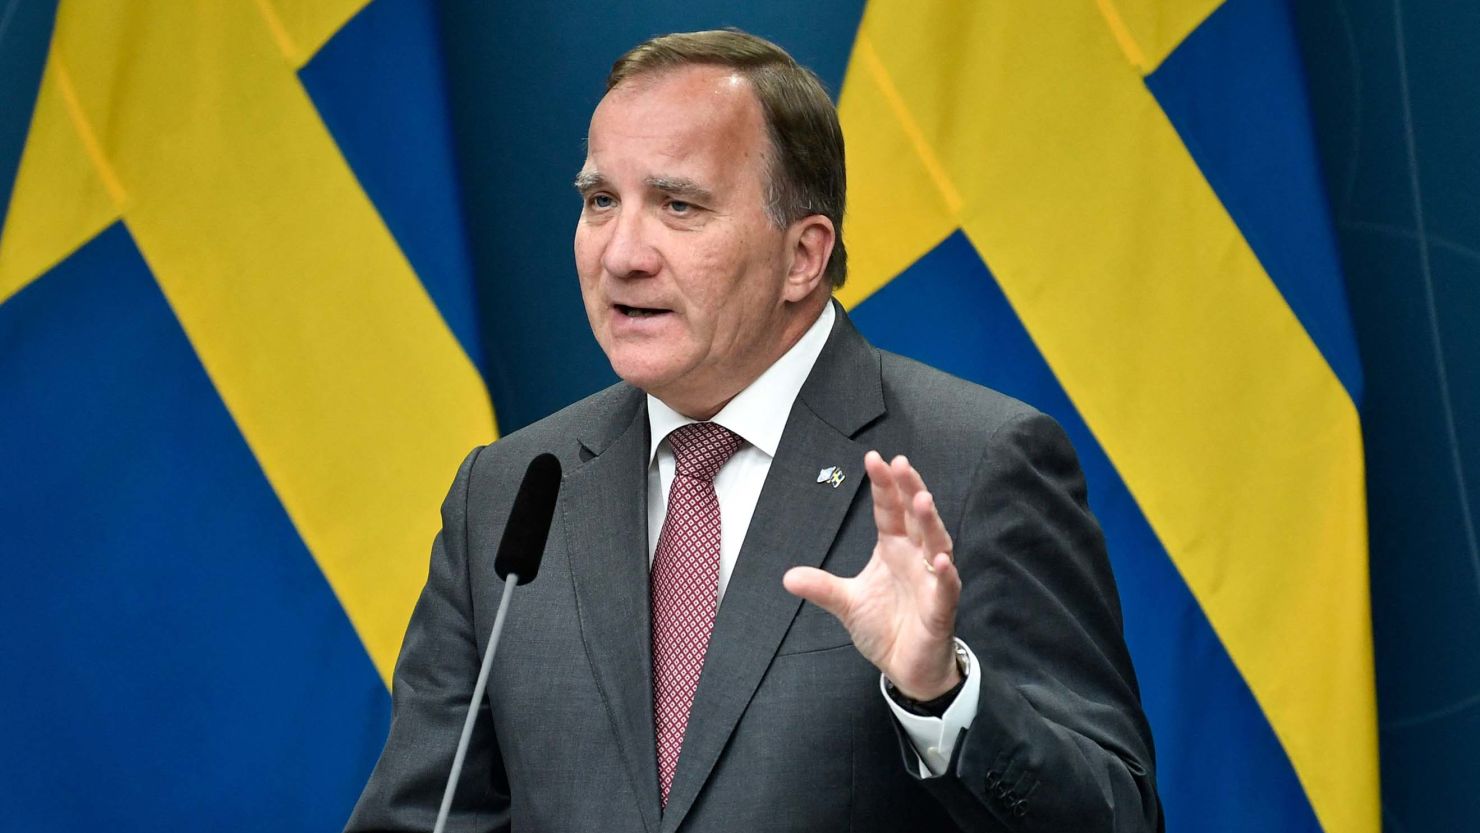 Lofven lost a confidence vote in parliament last week.